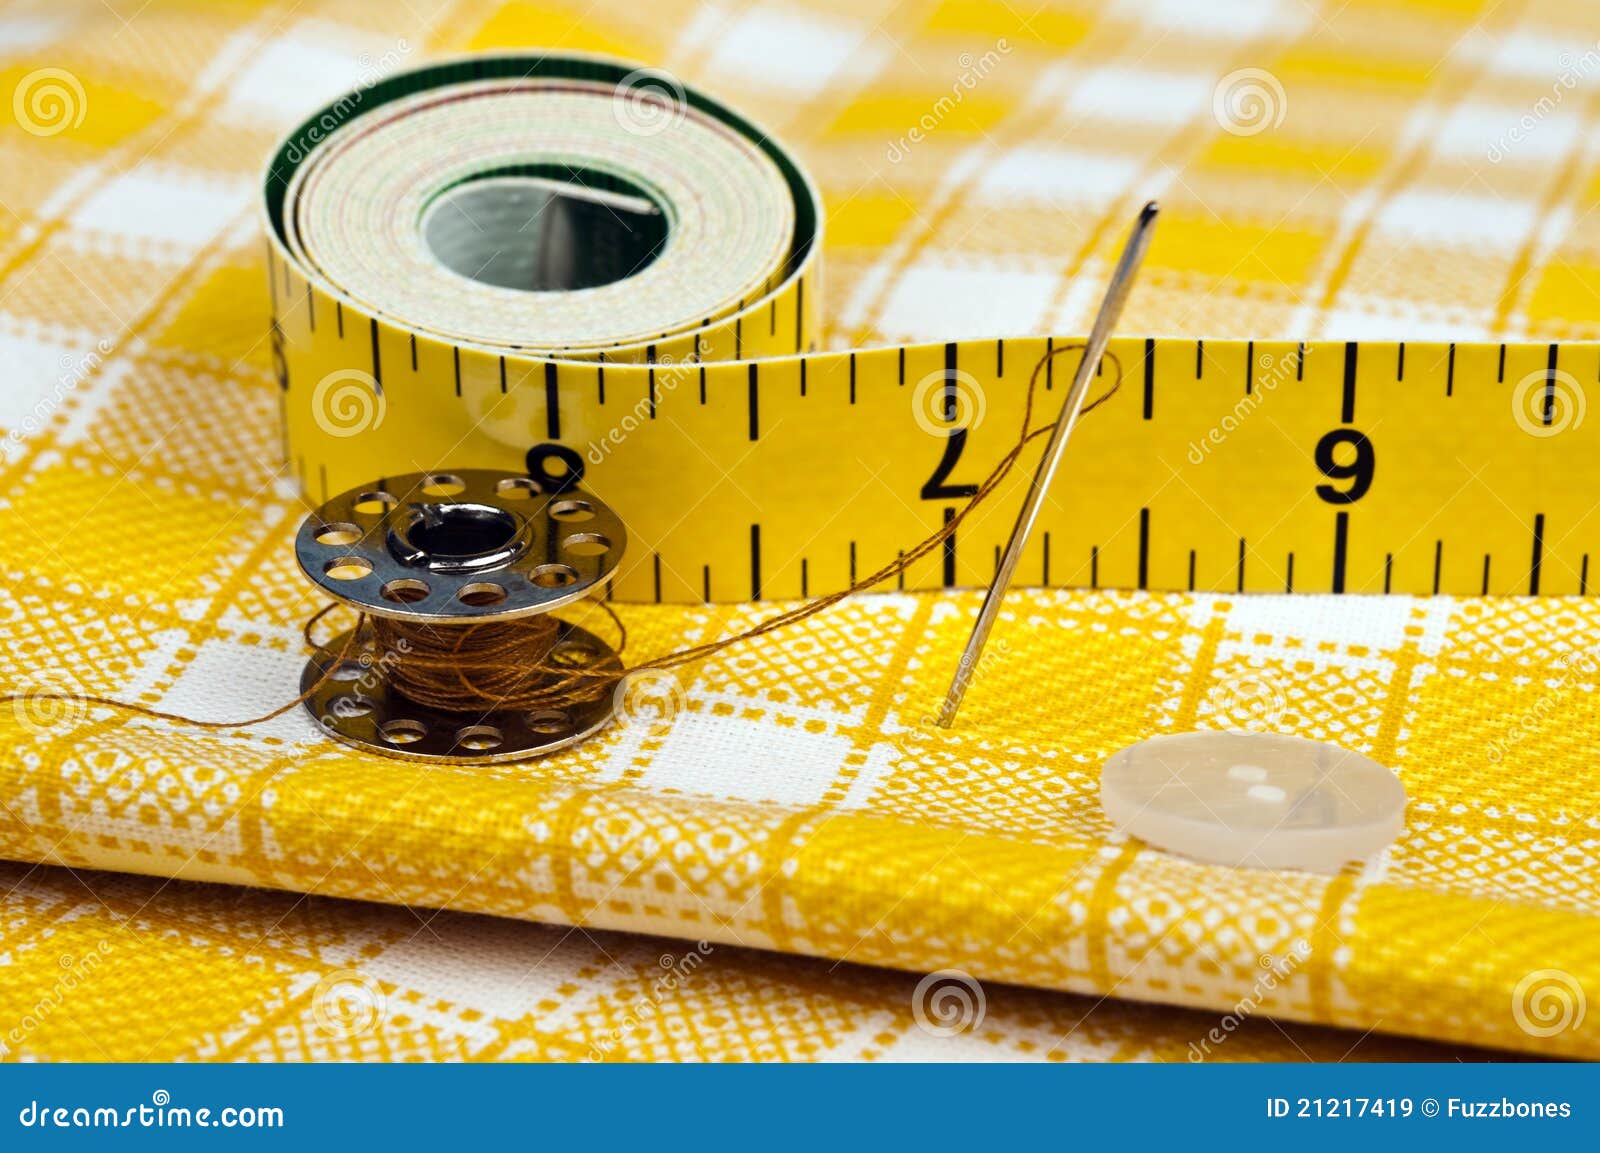 Yellow Bobbin Needle And Sewing Button Stock Photo - Download